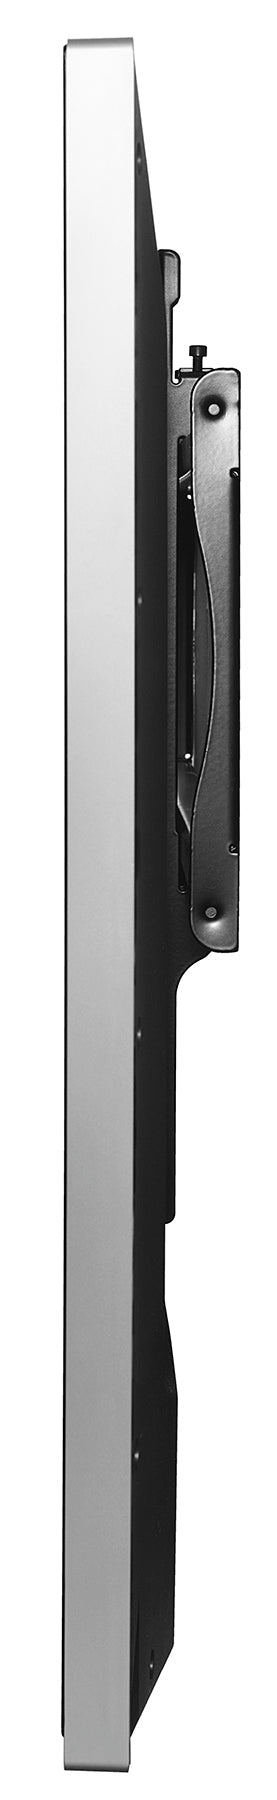 SF650 Security SmartMount® Universal Flat Mount For 46 to 90"